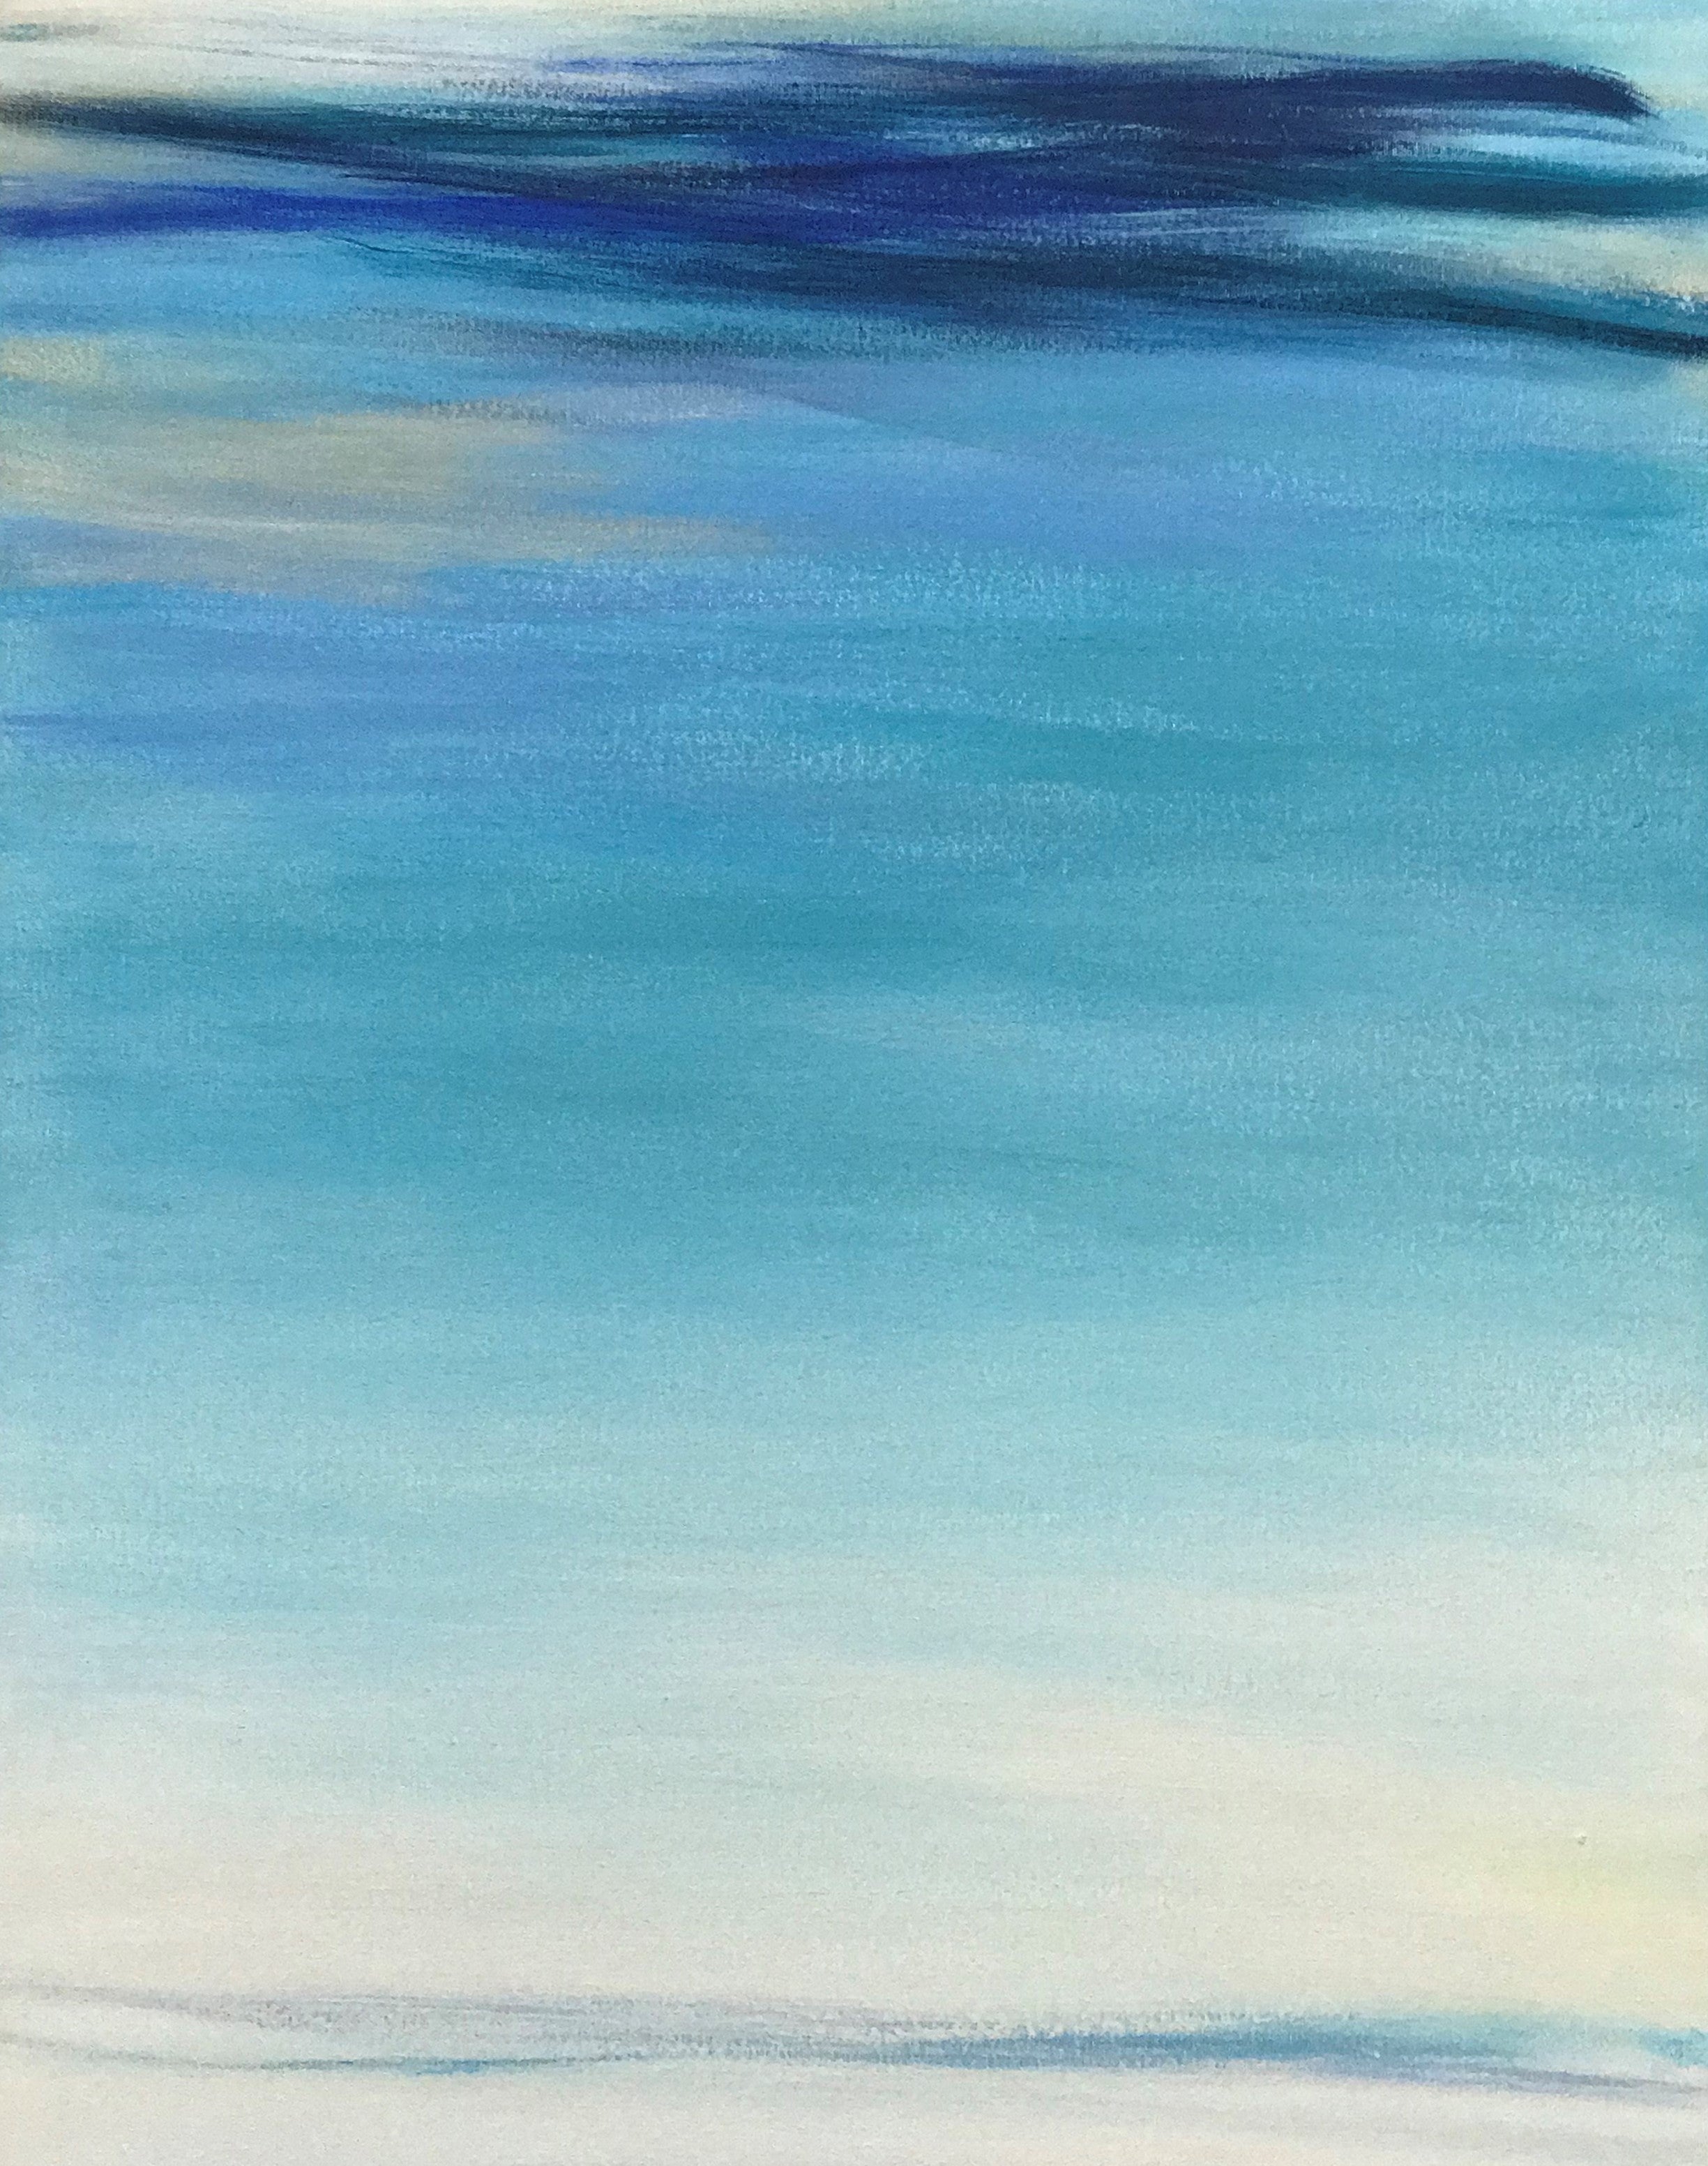 'WAVES #55' oil on canvas